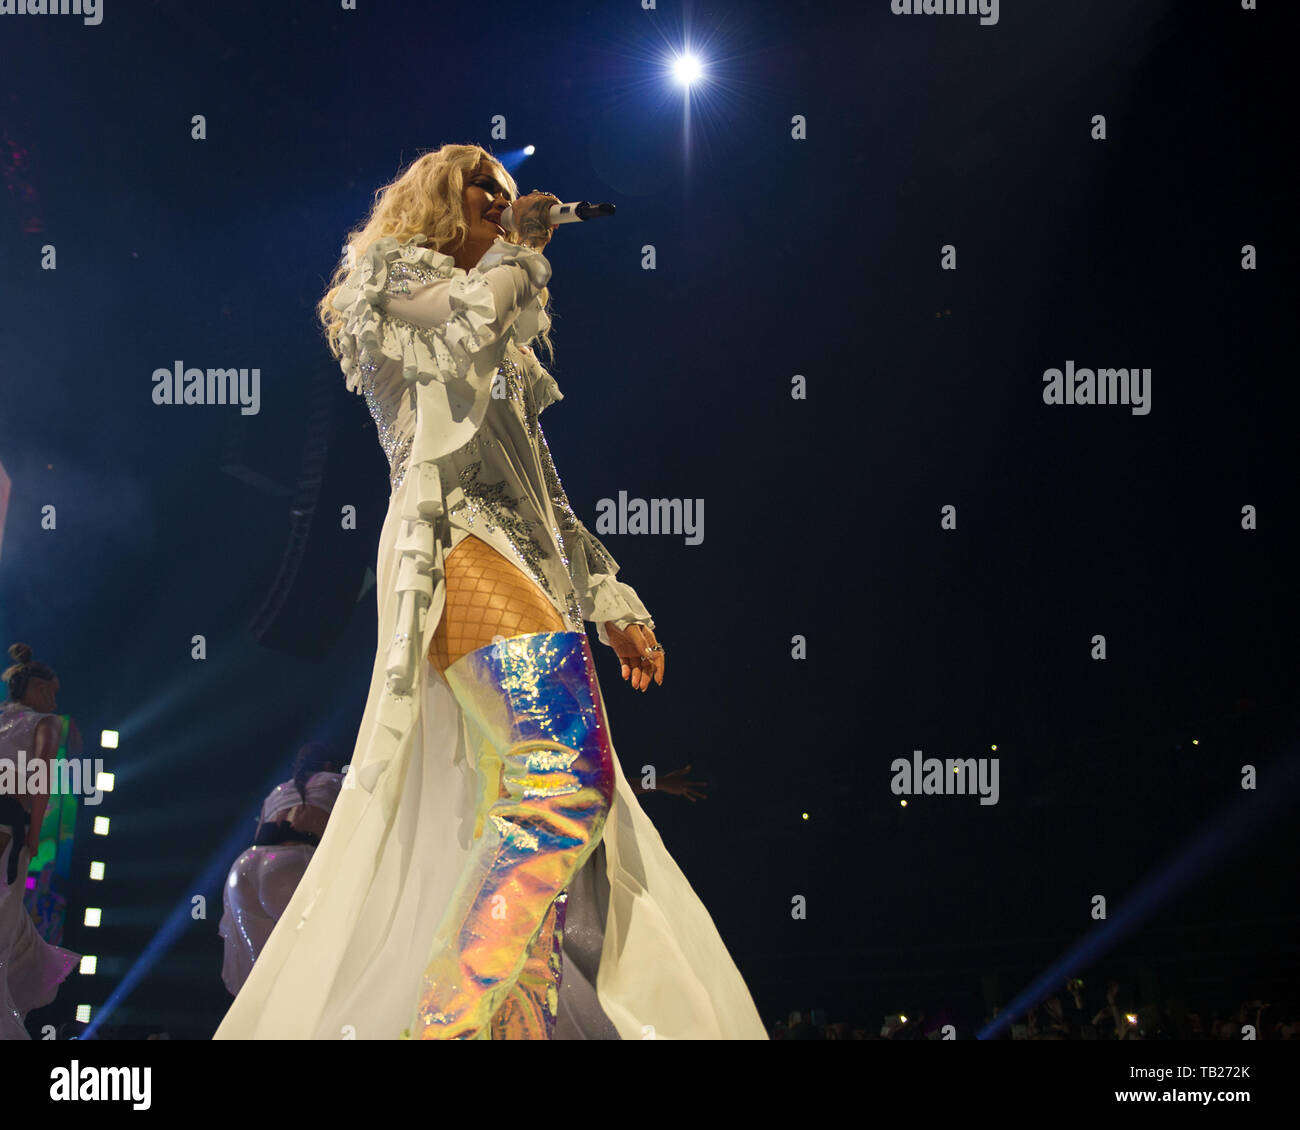 Glasgow, UK. 29 May 2019. Rita Ora in Concert at the SSE Hydro Arena in Glasgow.  The singer’s latest release,’ Let You Love Me’, became her 13th Top 10 on the Official Singles Chart. It means Rita set a new UK chart record for the most Top 10 singles by a British female artist. The star overtook music icons Shirley Bassey and Petula Clark, who each lay claim to 12 Top 10 hits.  Colin Fisher/Alamy Live News Stock Photo